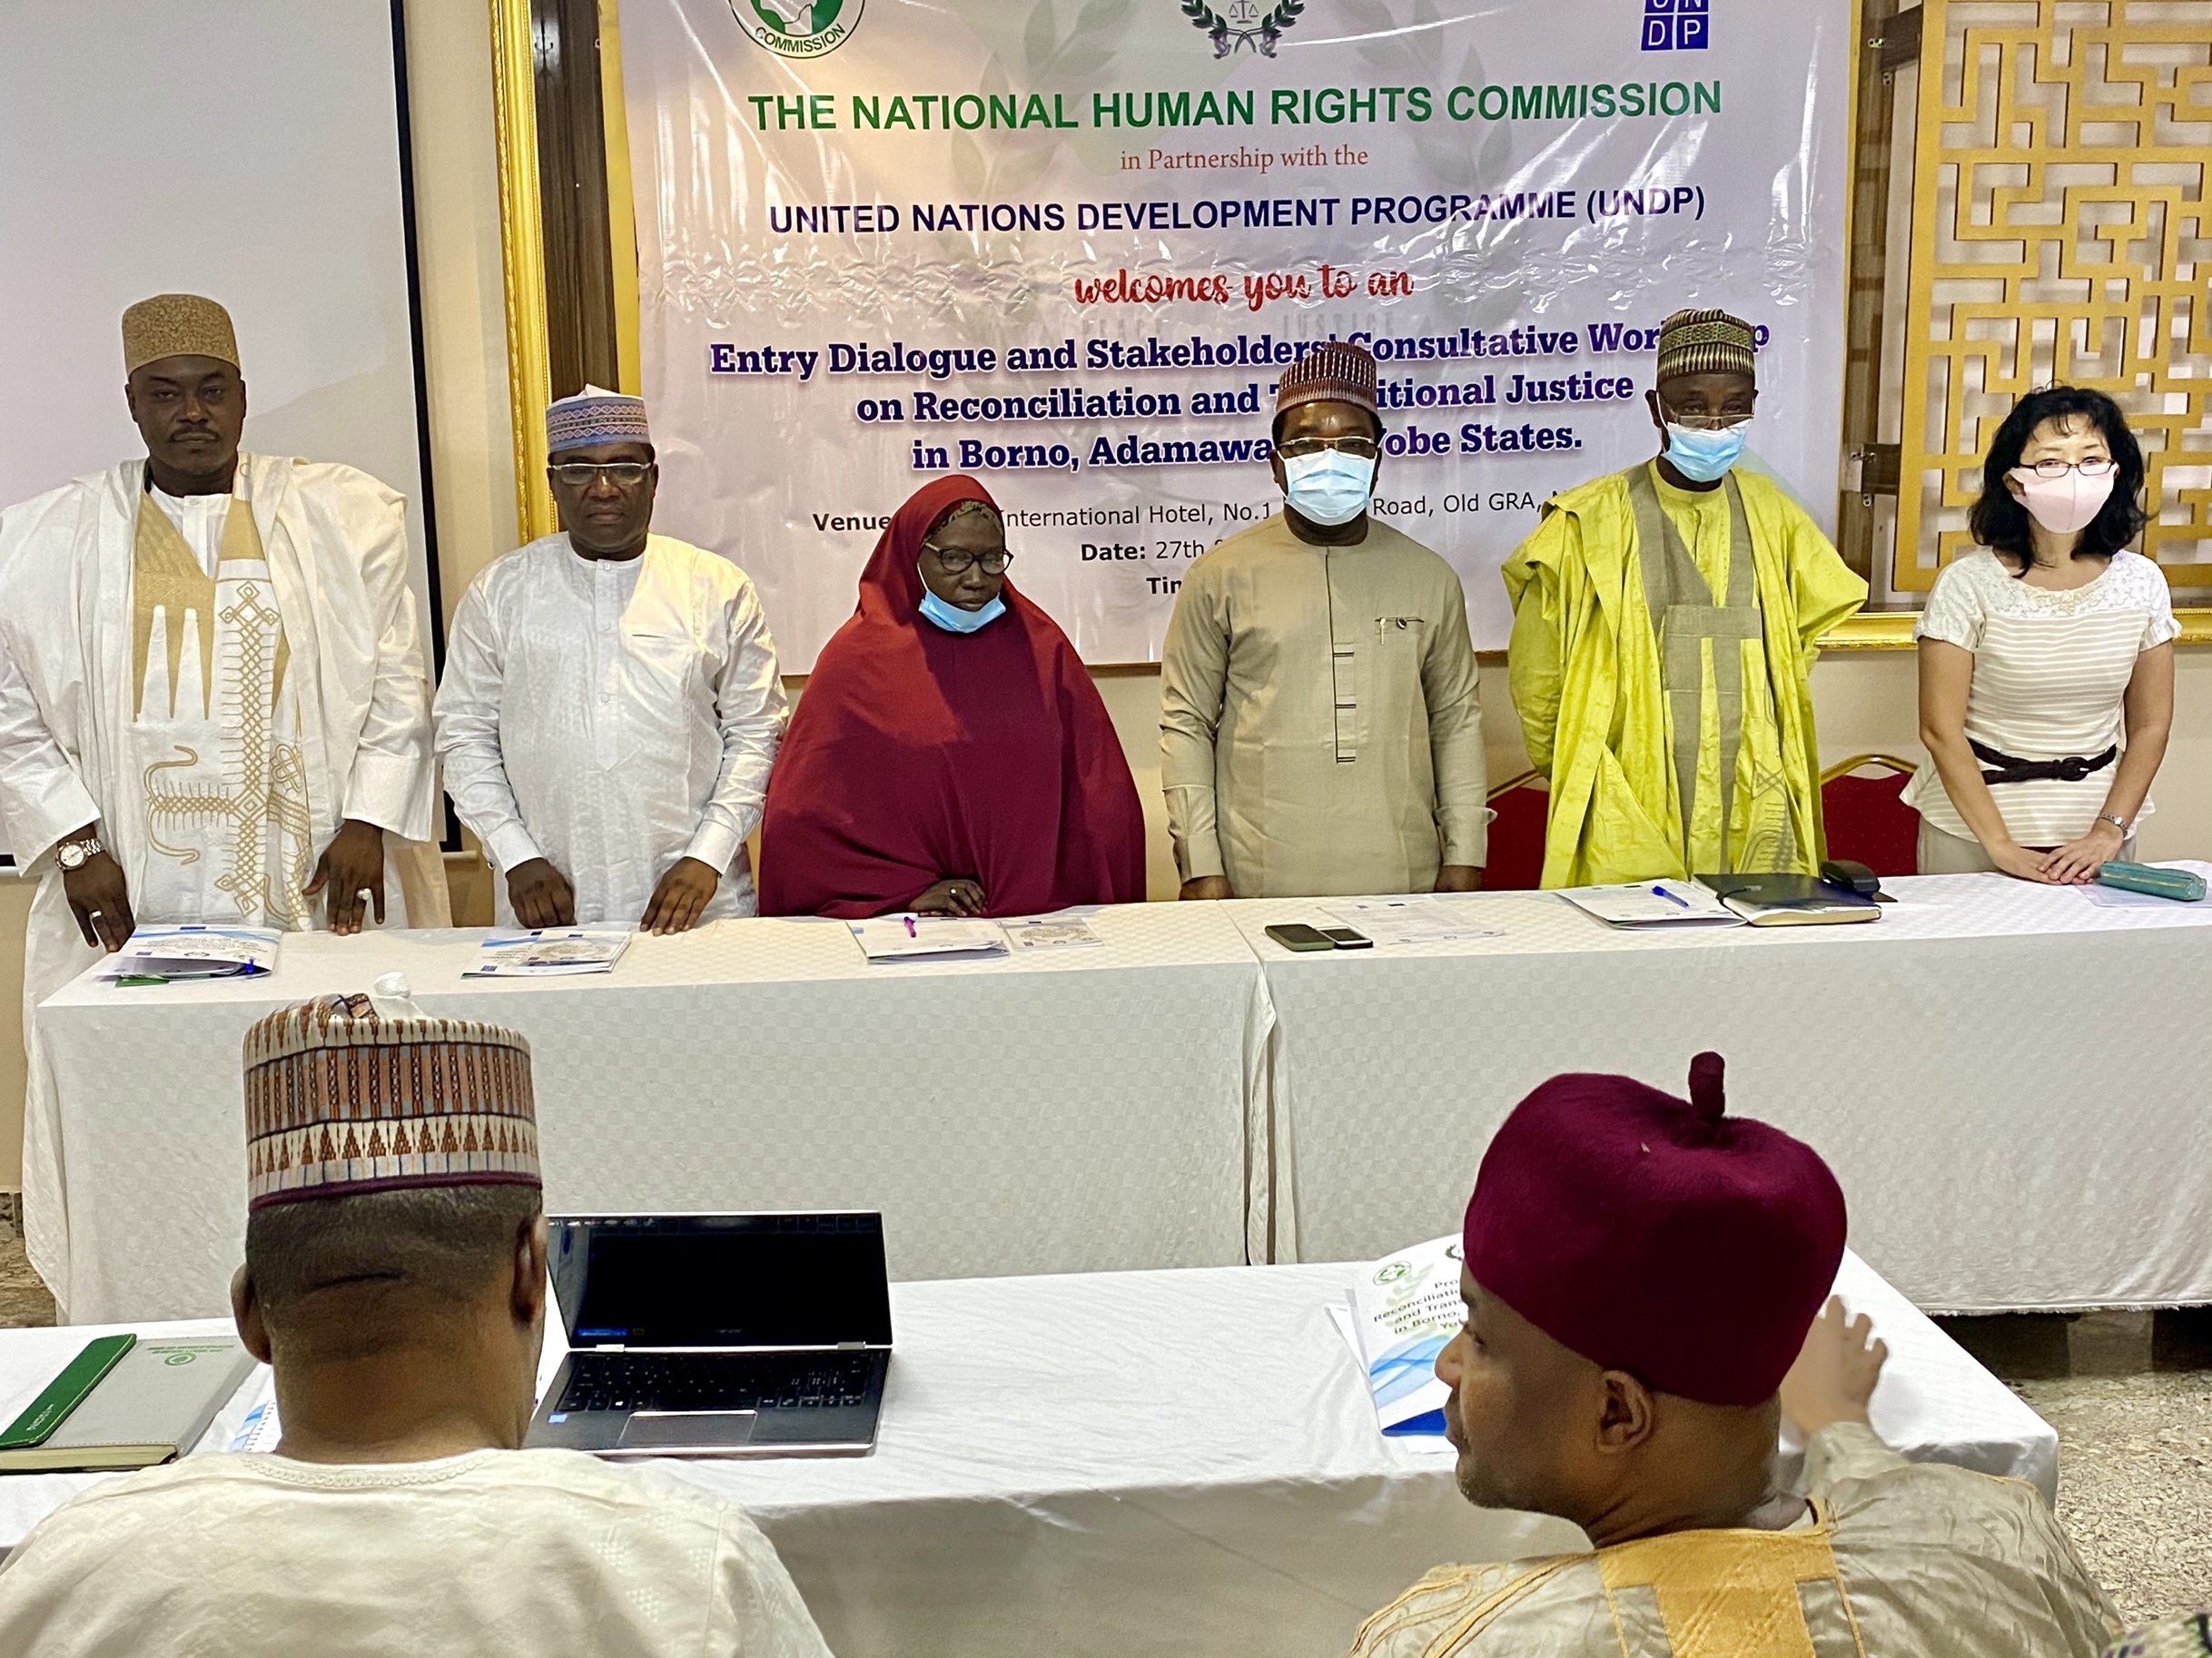  Entry Dialogue and Stakeholders’ Consultative Workshop on Reconciliation, Transitional and Restorative Justice in Borno, Adamawa and Yobe State,